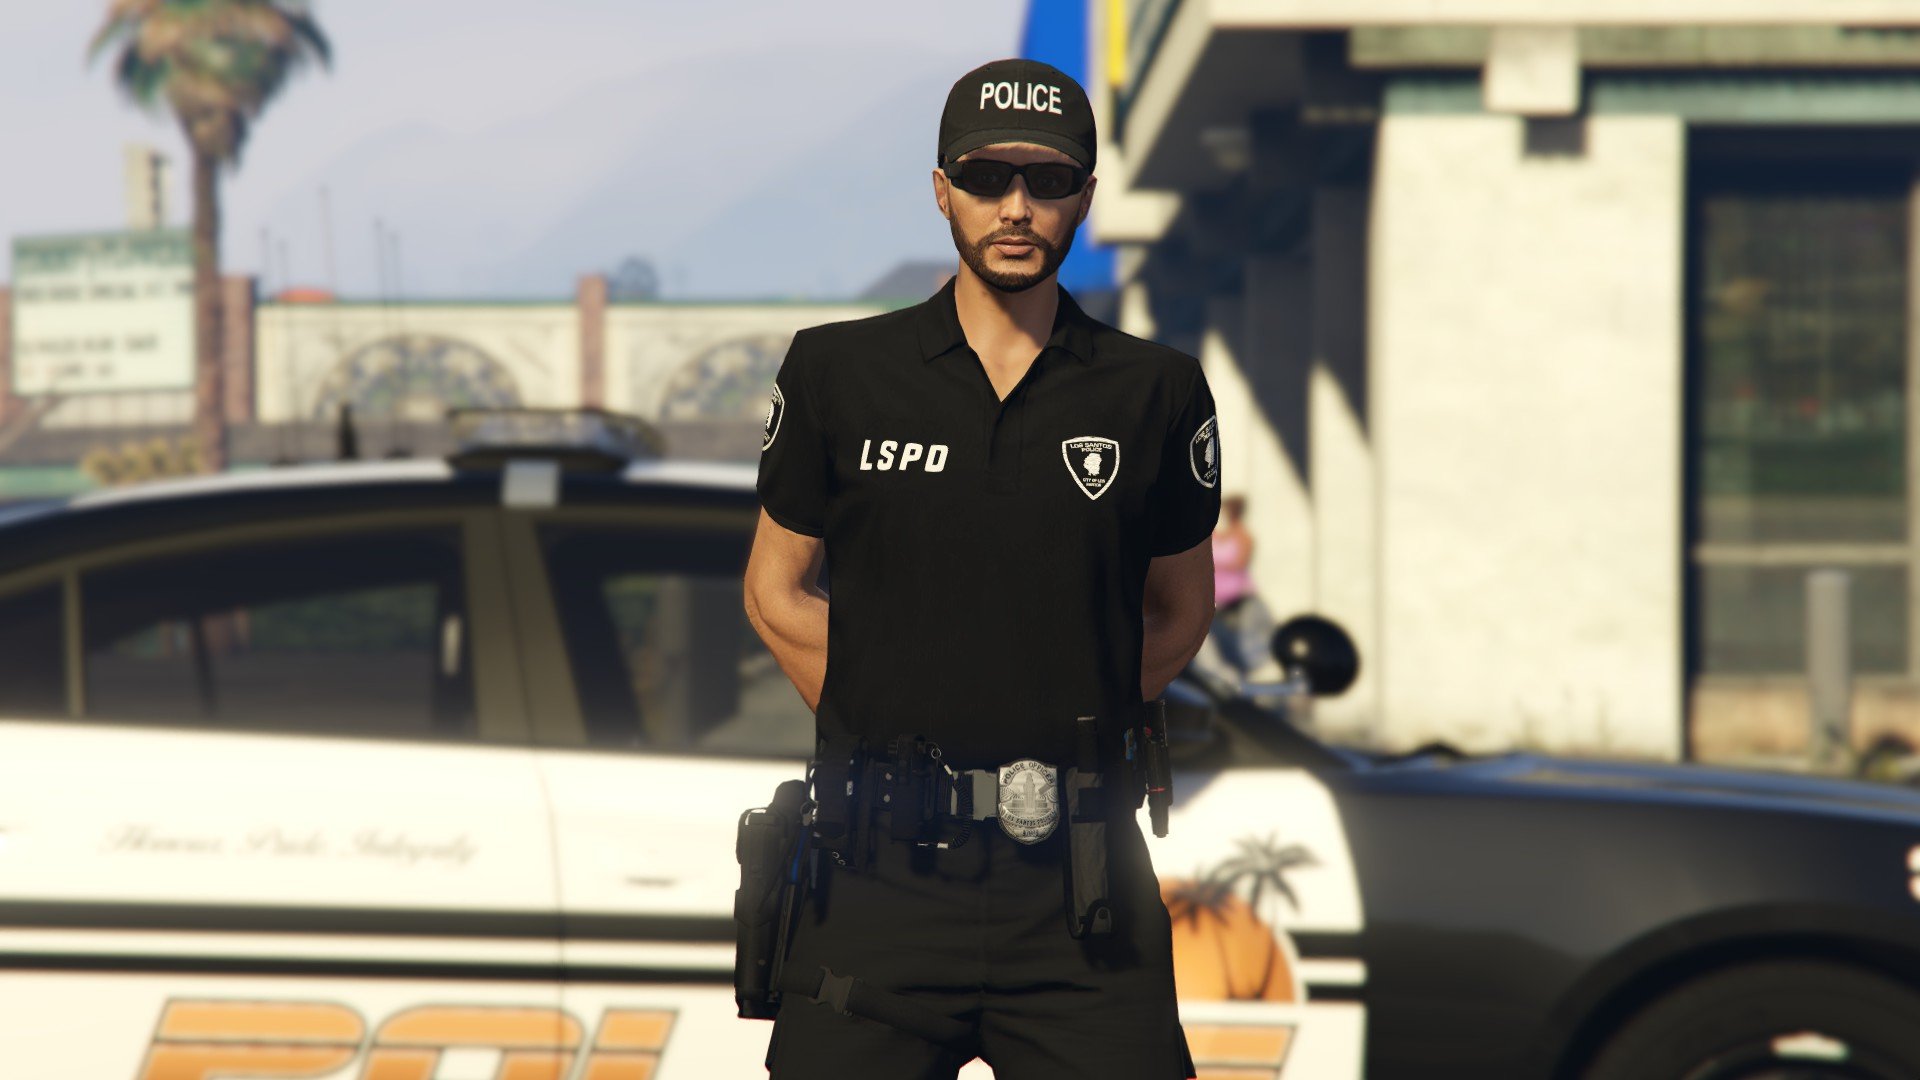 Rejected - Leader of LSPD| Max Bolo | Grand Role Play | Forum